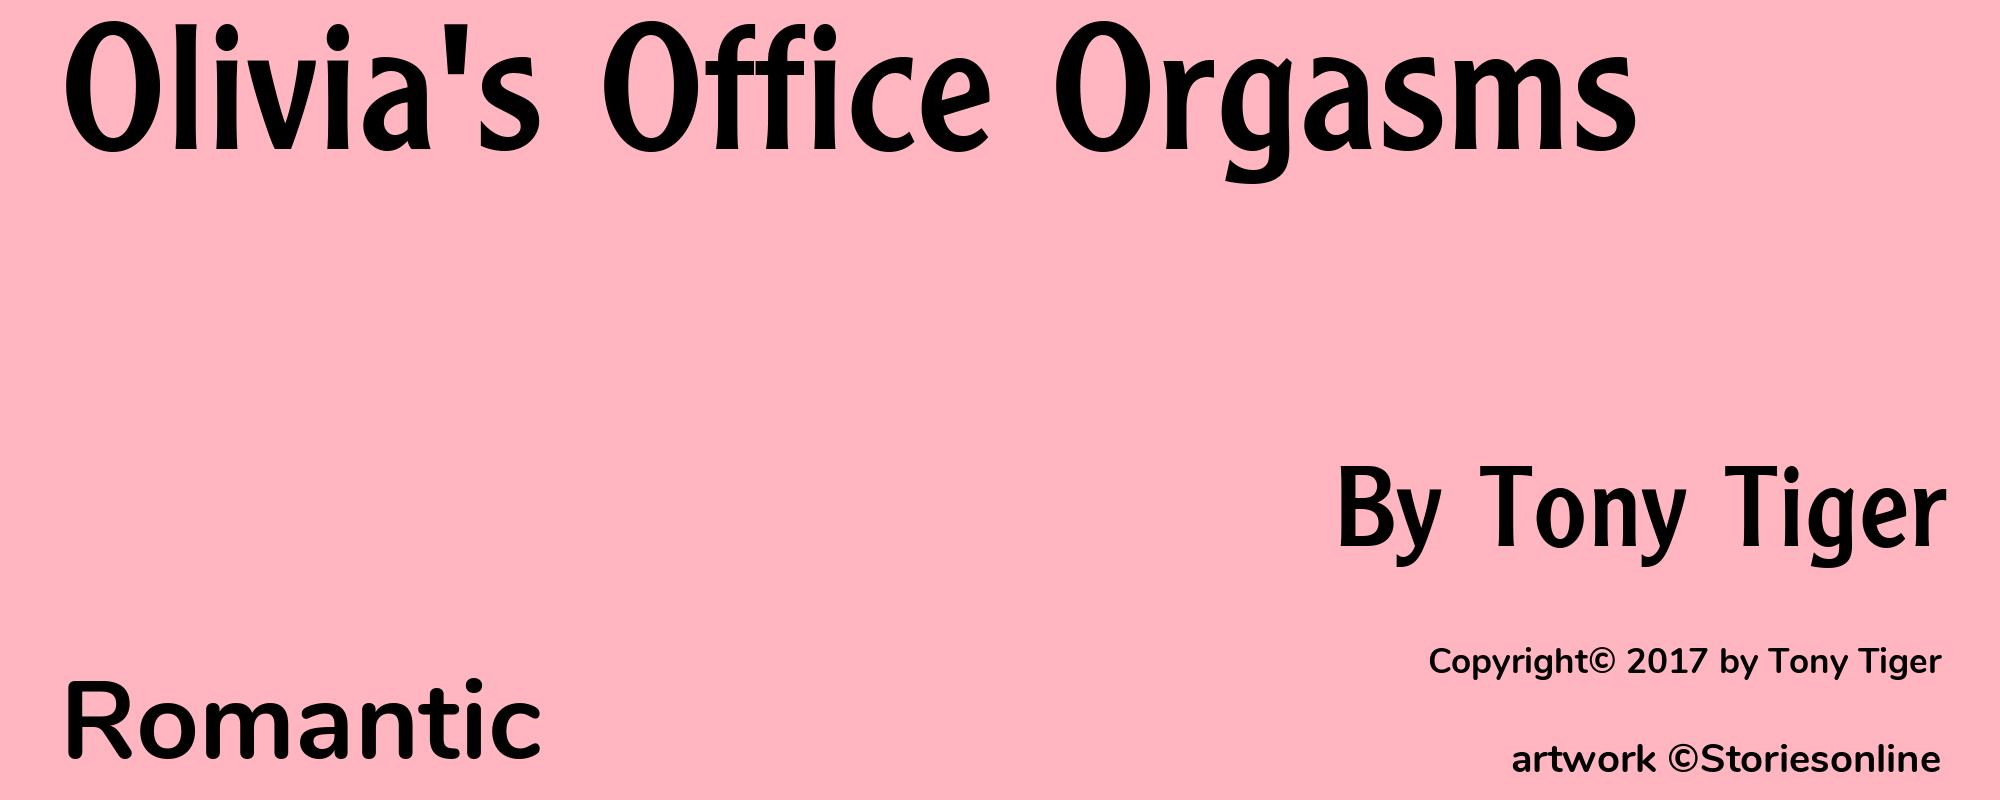 Olivia's Office Orgasms - Cover